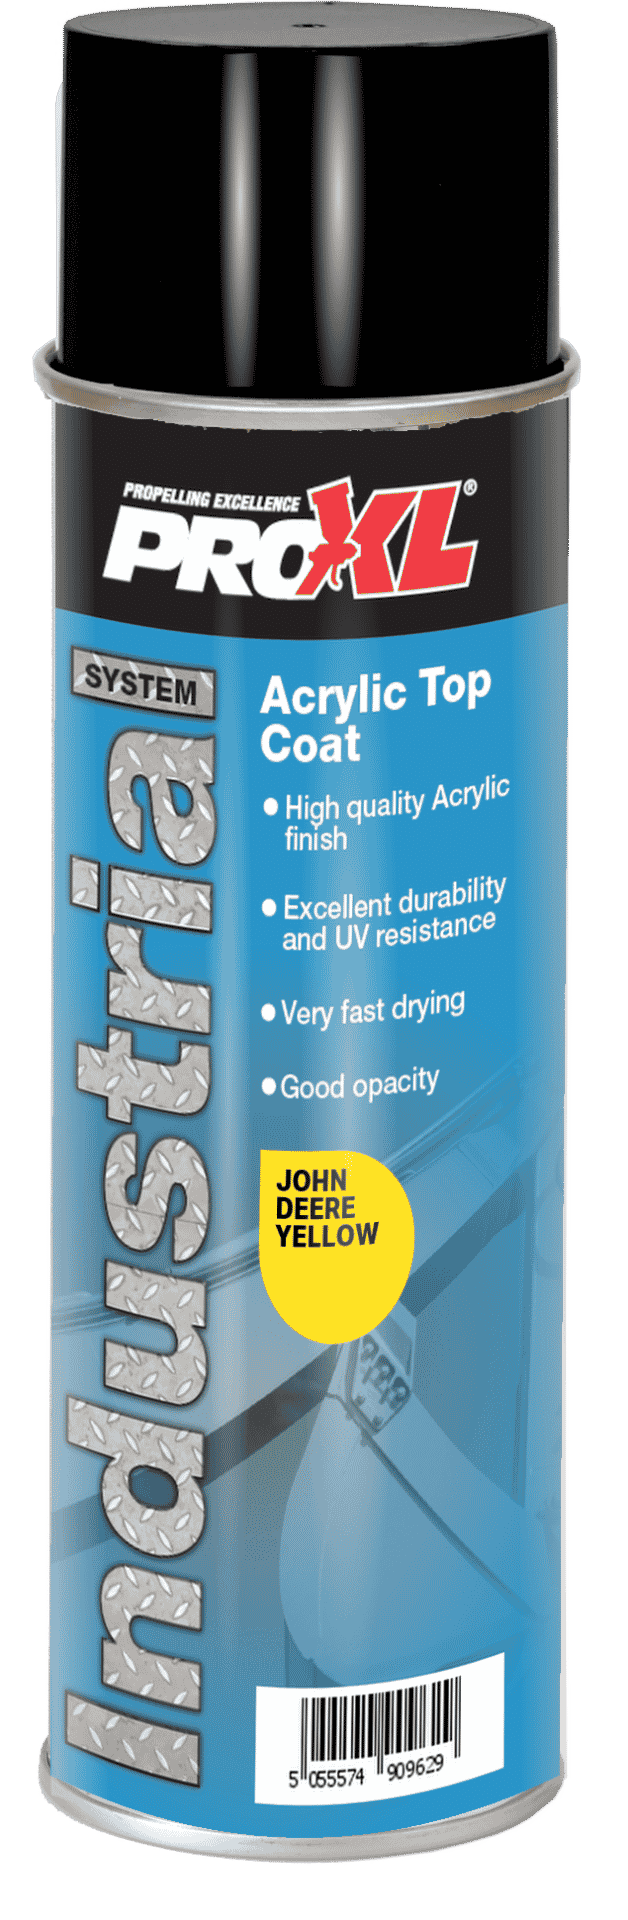 Acrylic Topcoat Aerosol – Agricultural/Construction colours (500ml) Product Image